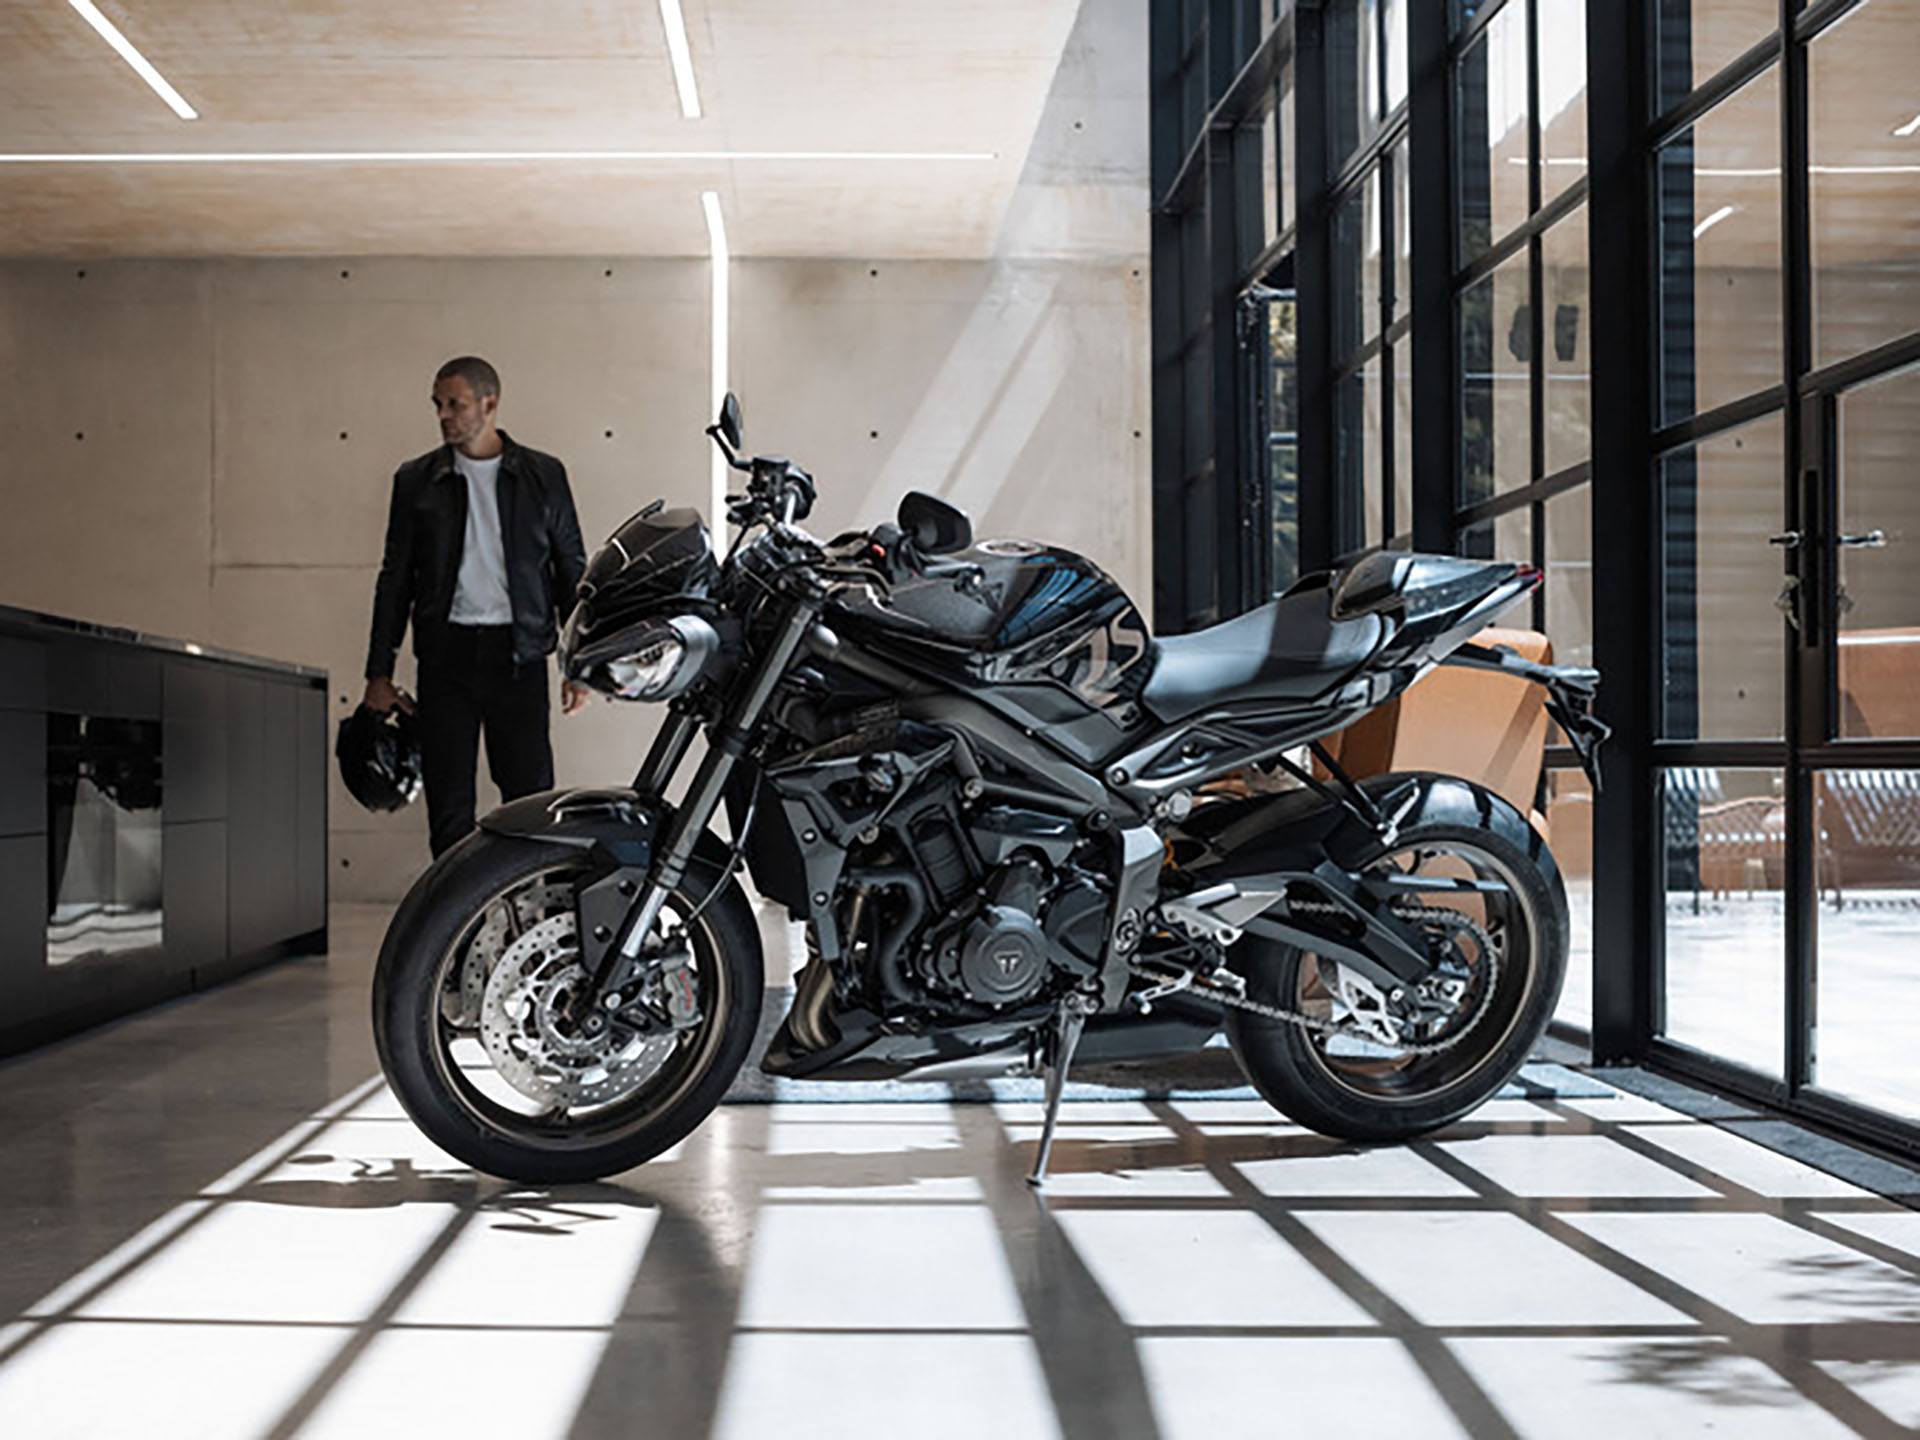 2023 Triumph Street Triple RS in Albany, New York - Photo 11